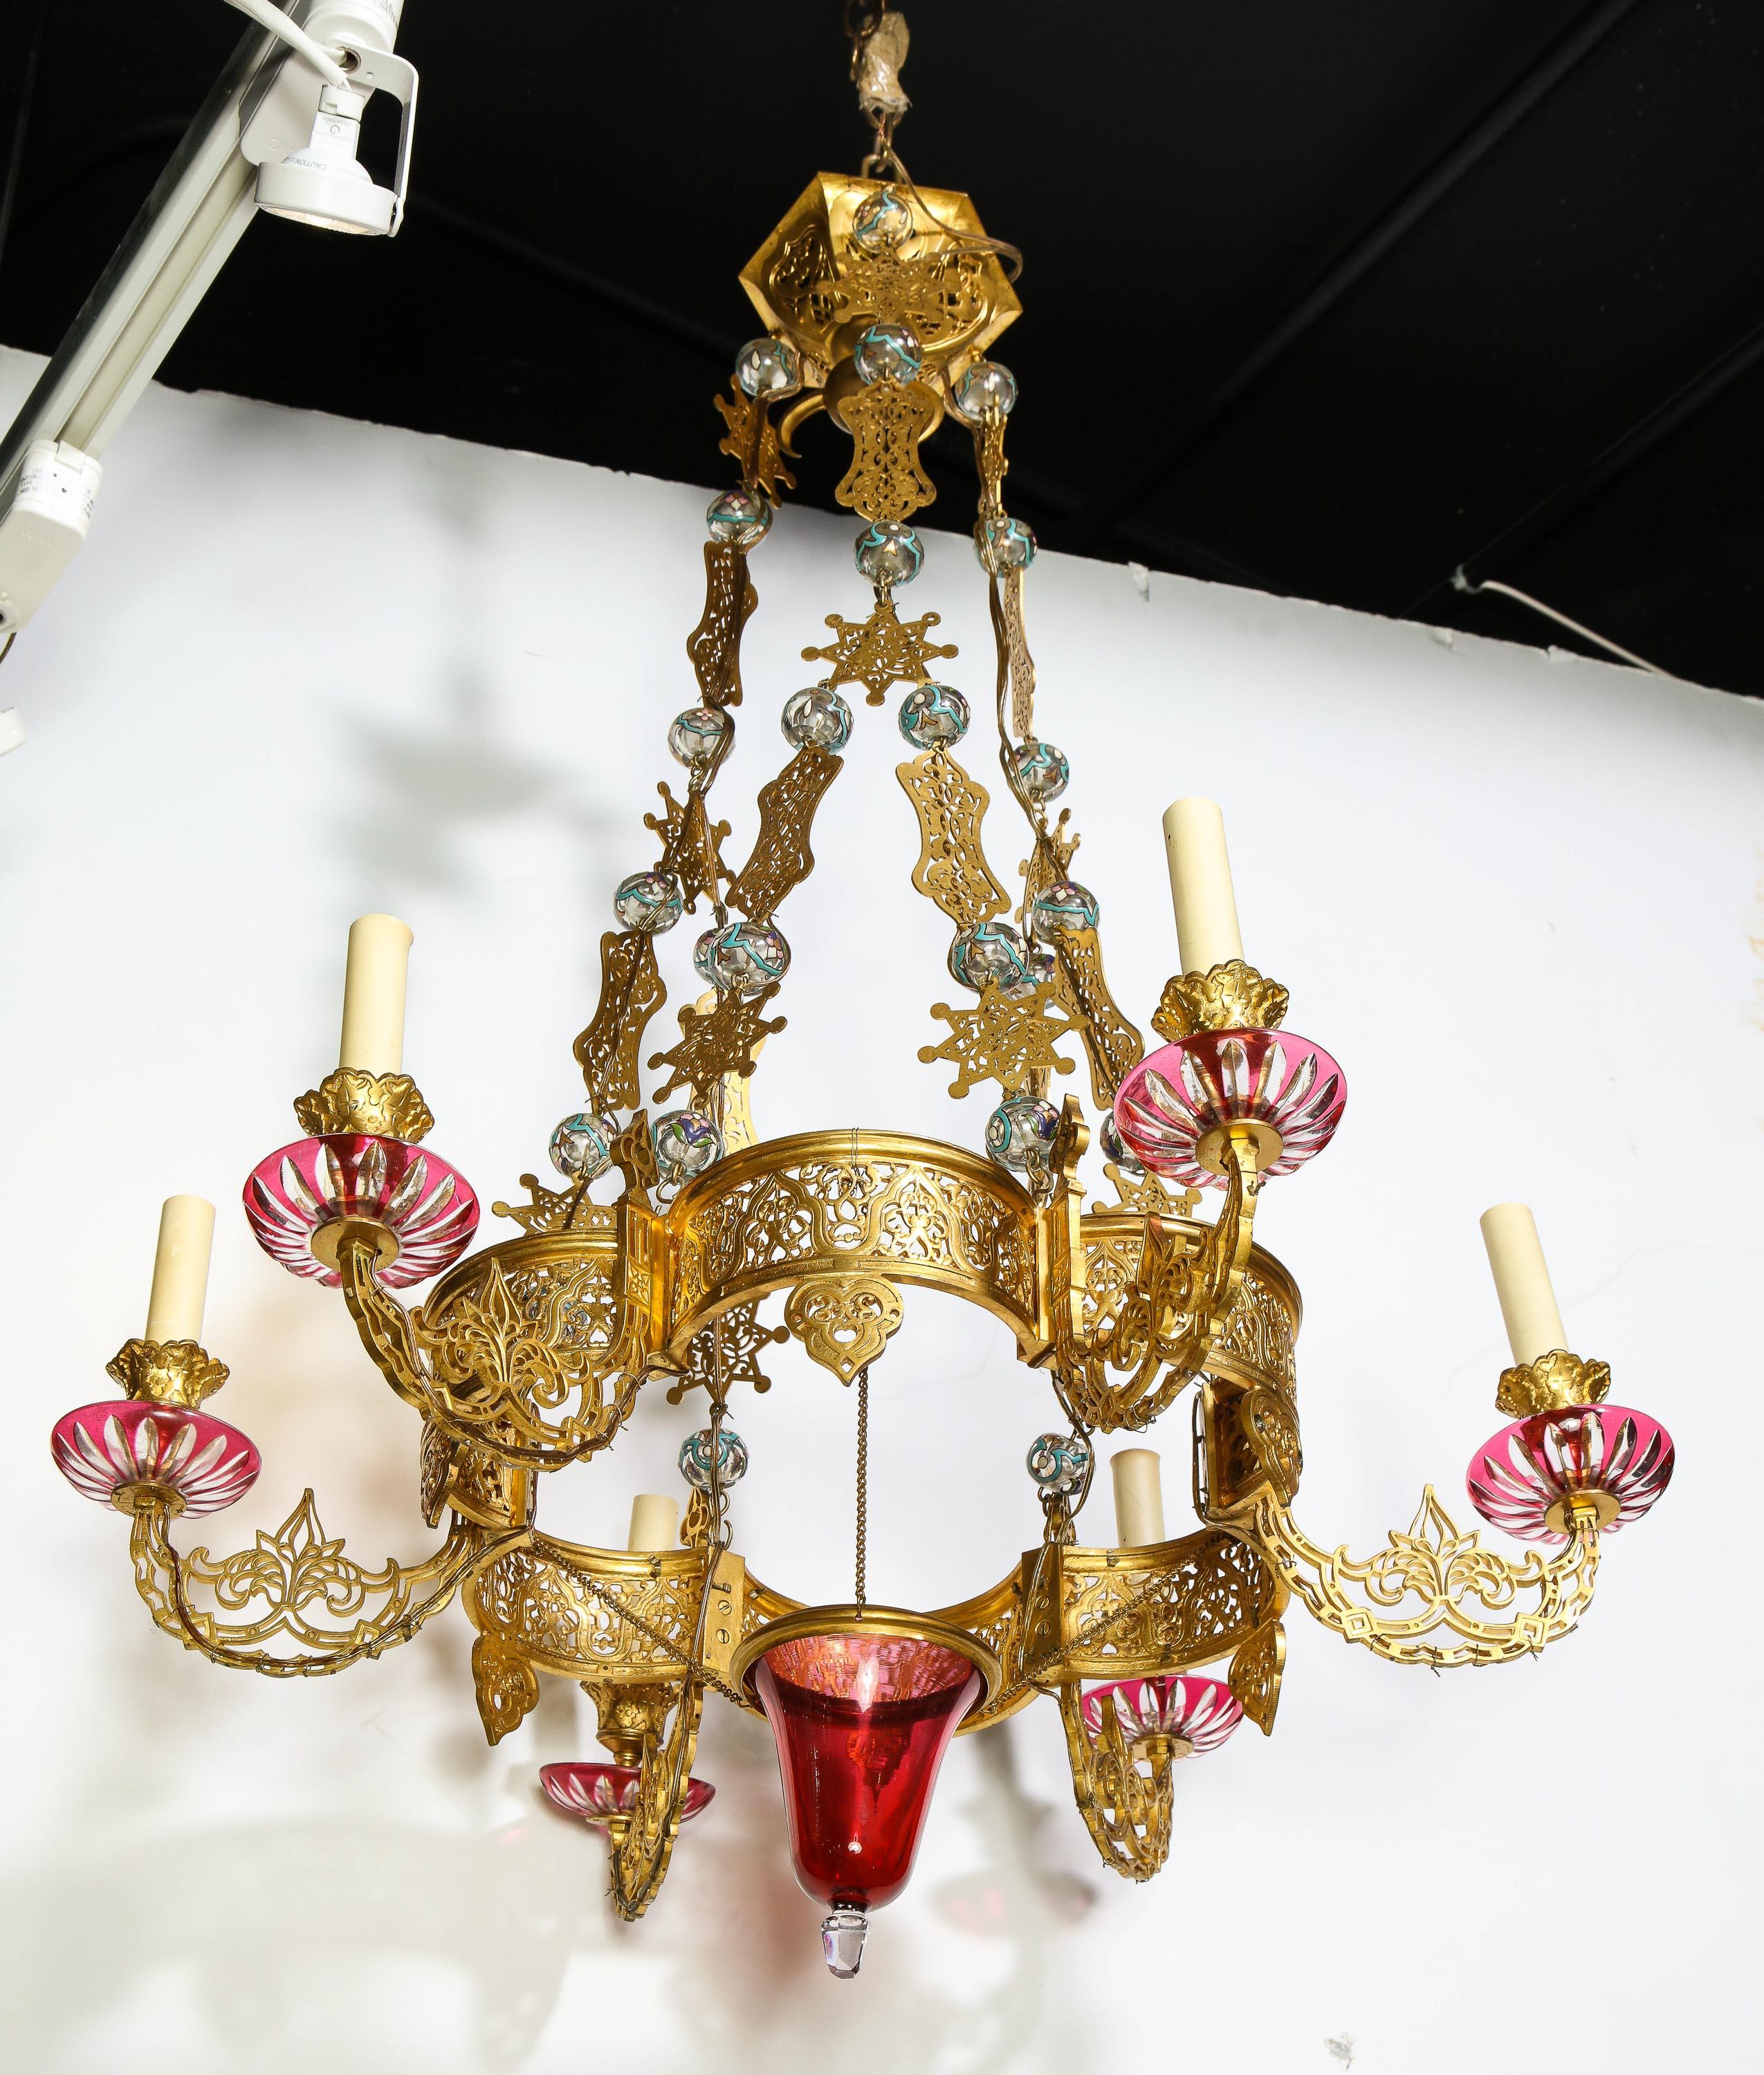 An exceptional and rare Islamic Alhambra bronze and enameled glass six-light mosque chandelier, circa 1870.

This one of a kind, exceptionally elegant, jewel-quality chandelier, is one of the most beautiful chandeliers we have seen in this style.